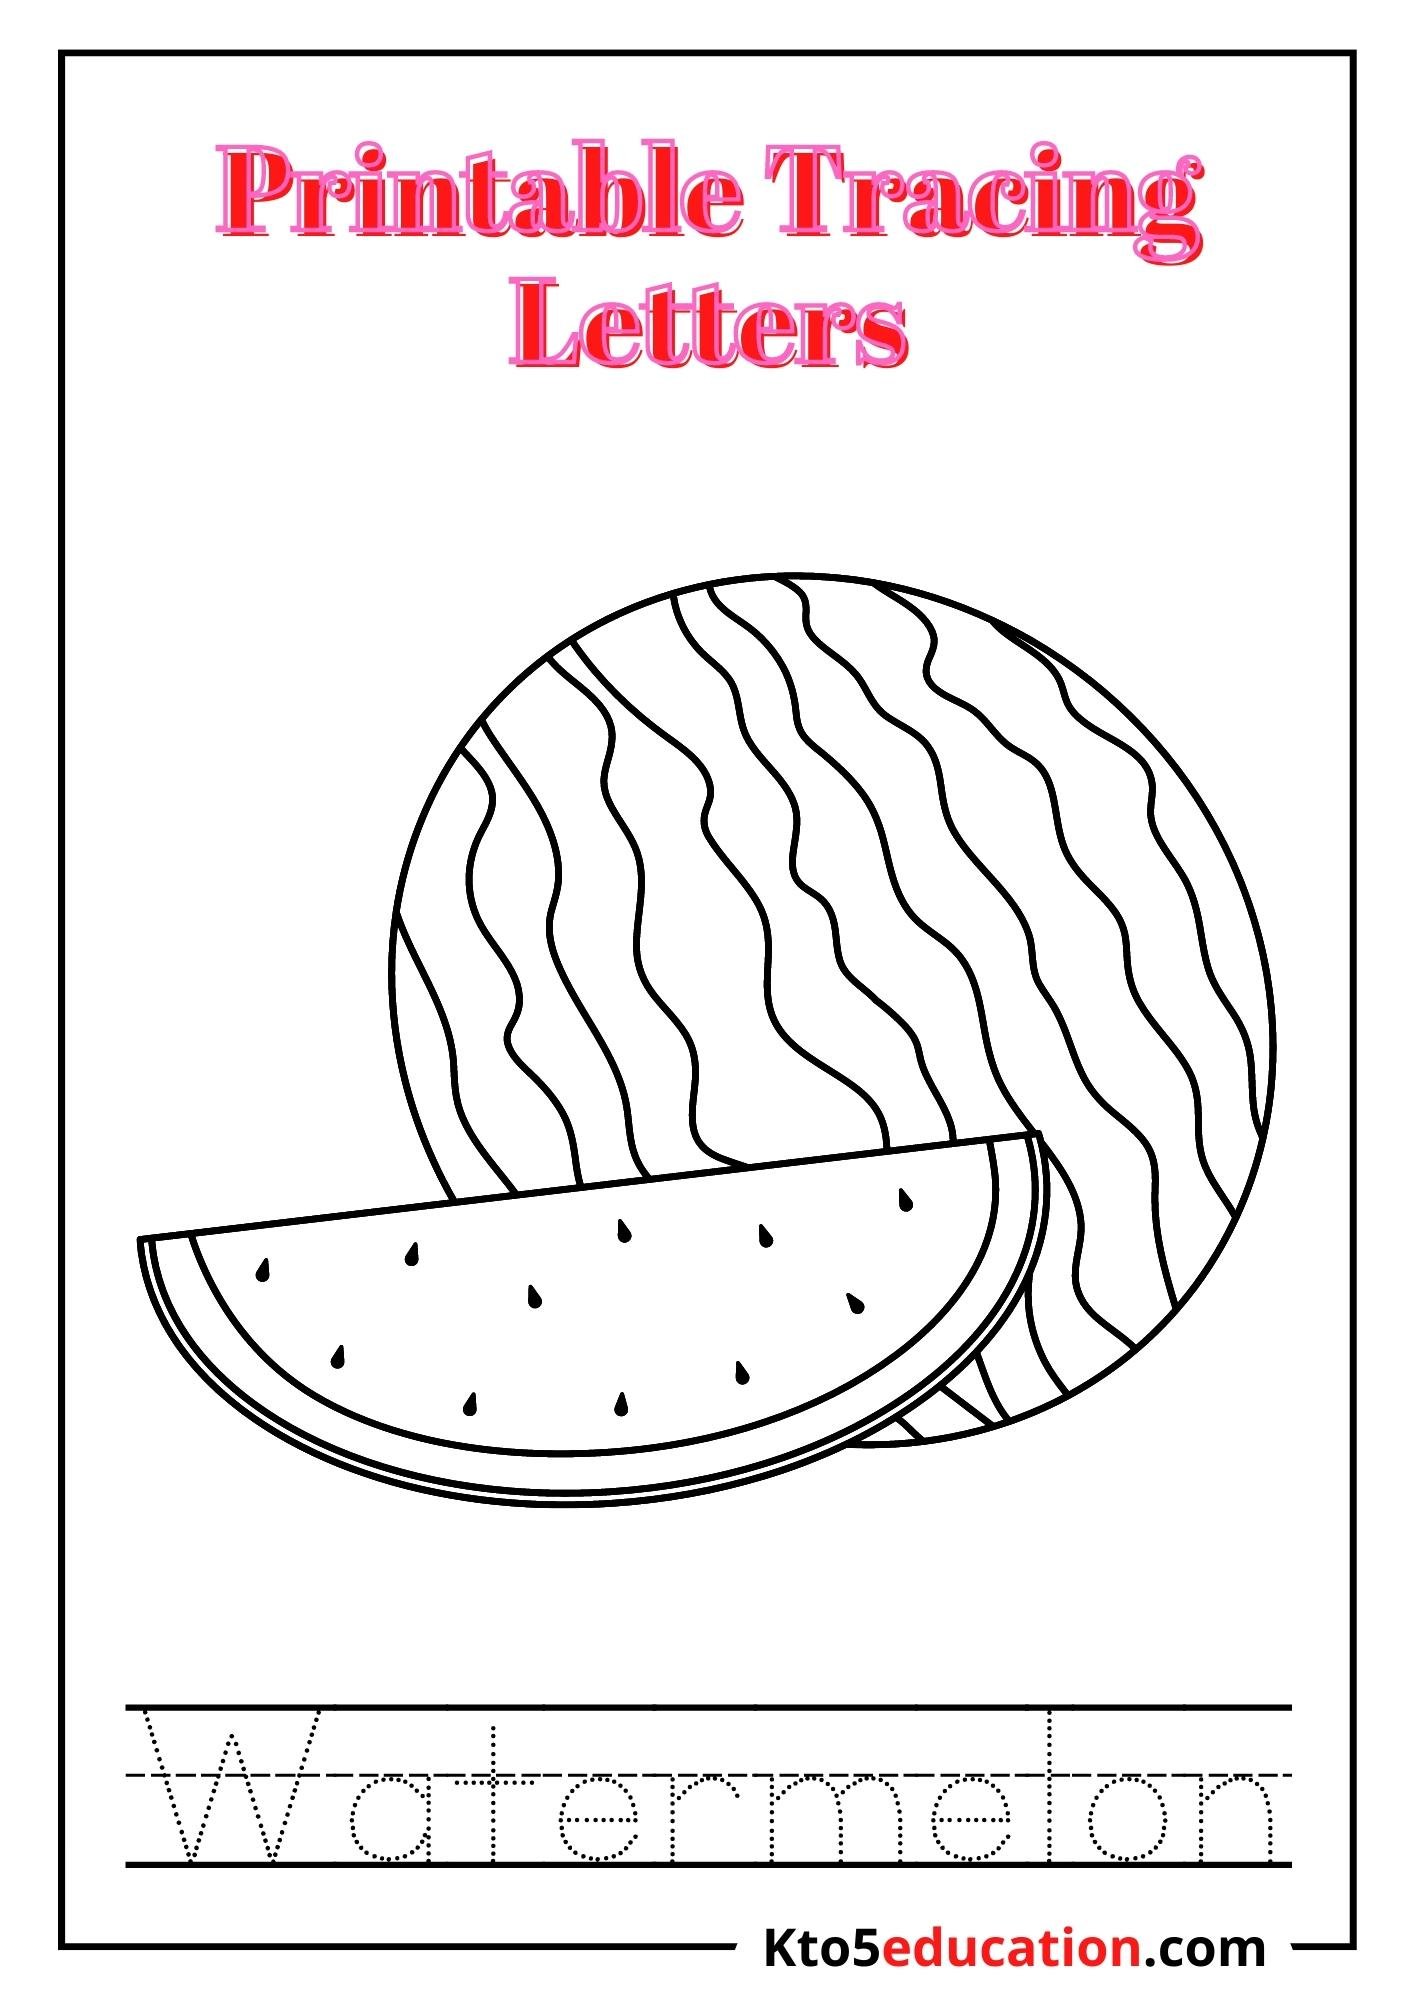 Free Printable Tracing Letter W worksheet